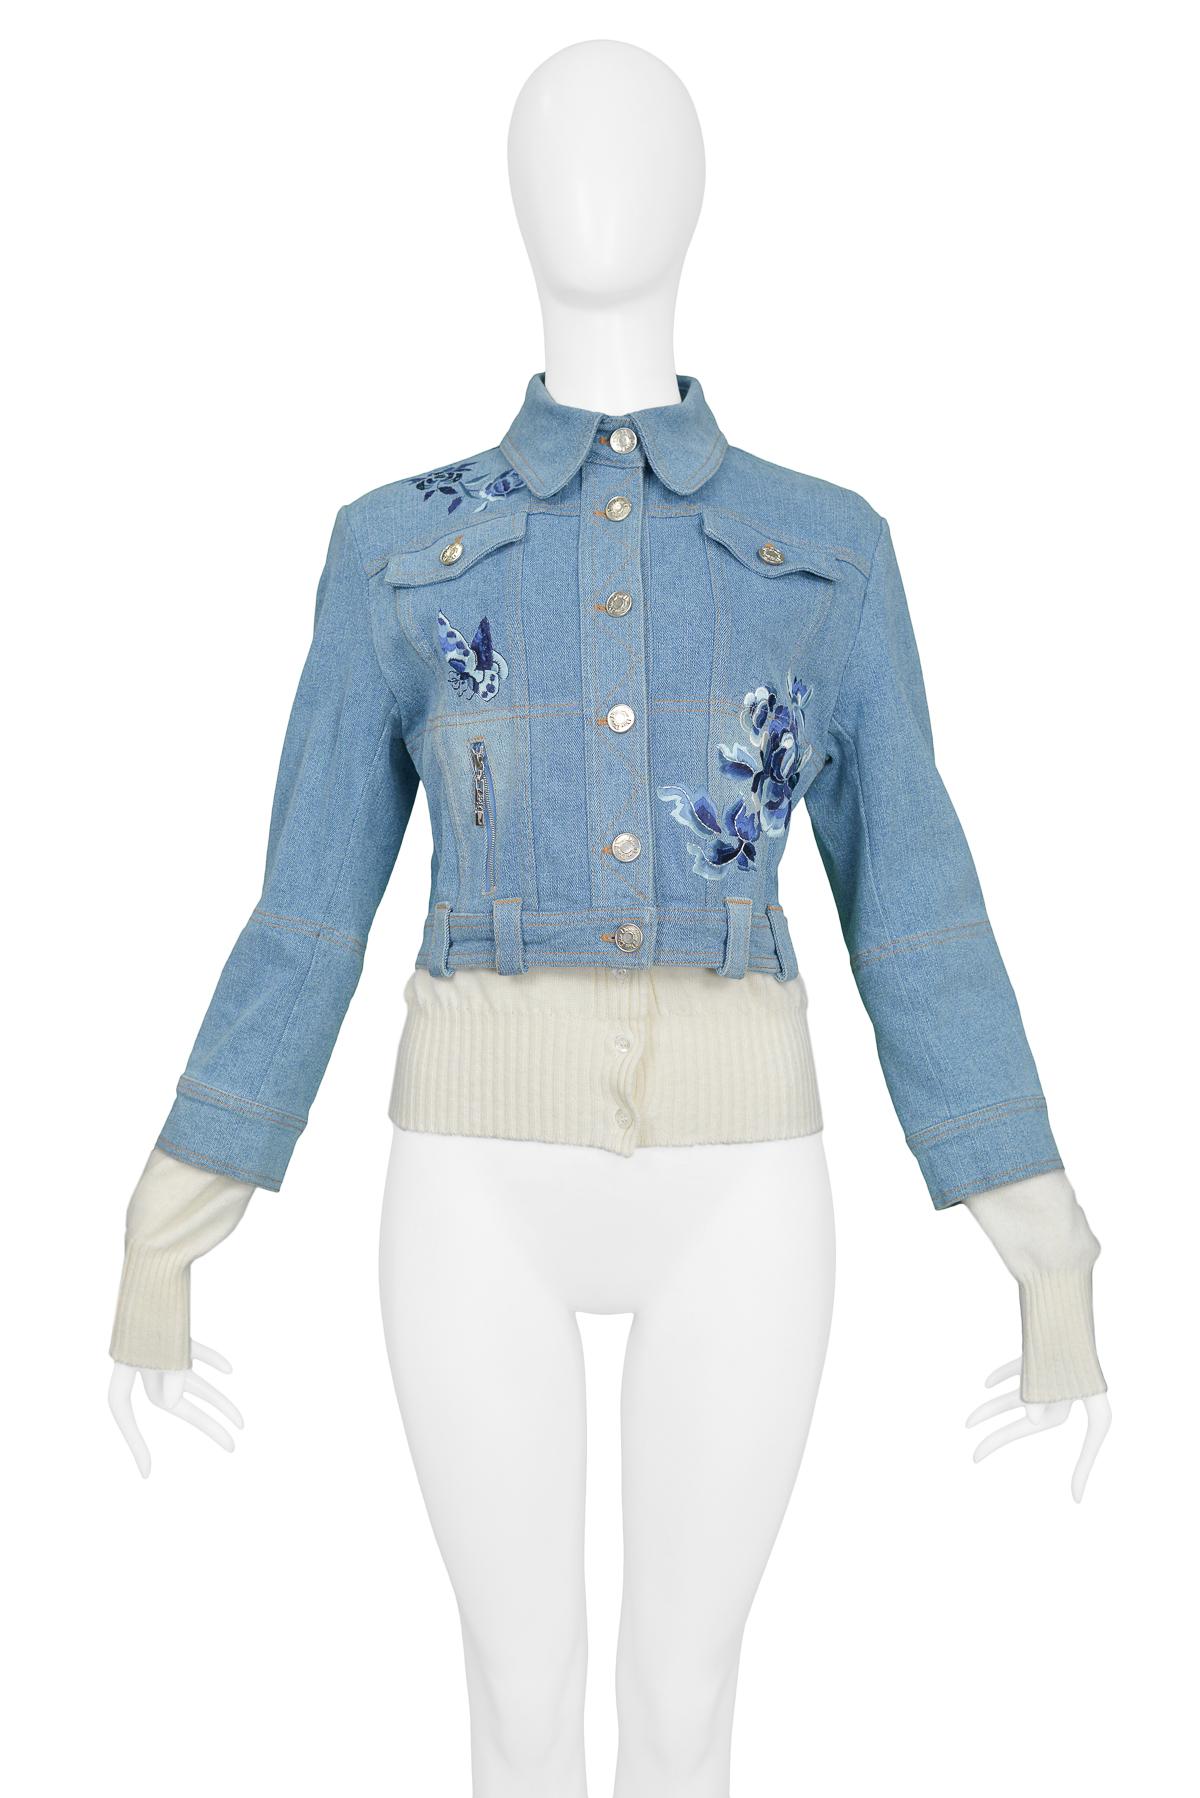 Resurrection Vintage is excited to offer a vintage Christian Dior by John Galliano blue denim jacket featuring tonal floral & butterfly embroidery, a cream sweater under layer, and belt loop detail at the hem.

Christian Dior
Designed By John